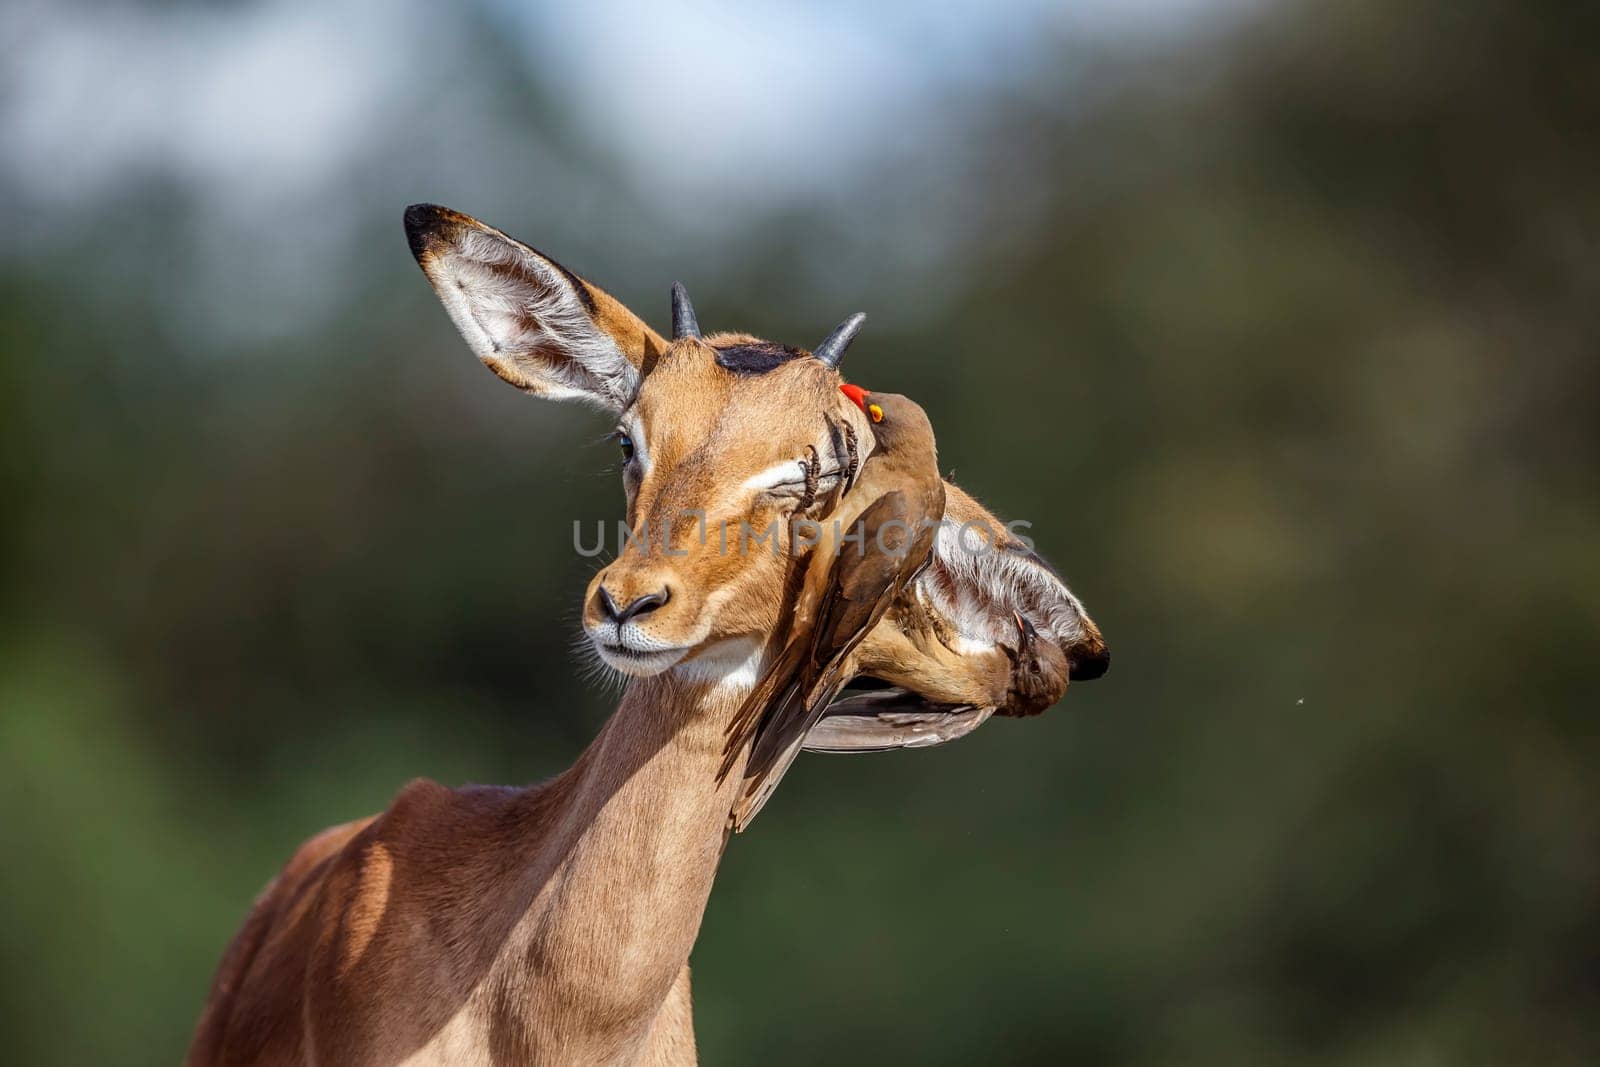 Common Impala portrait with Red billed Oxpecker in Kruger National park, South Africa ; Specie Aepyceros melampus family of Bovidae  and Specie Buphagus erythrorhynchus family of Buphagidae